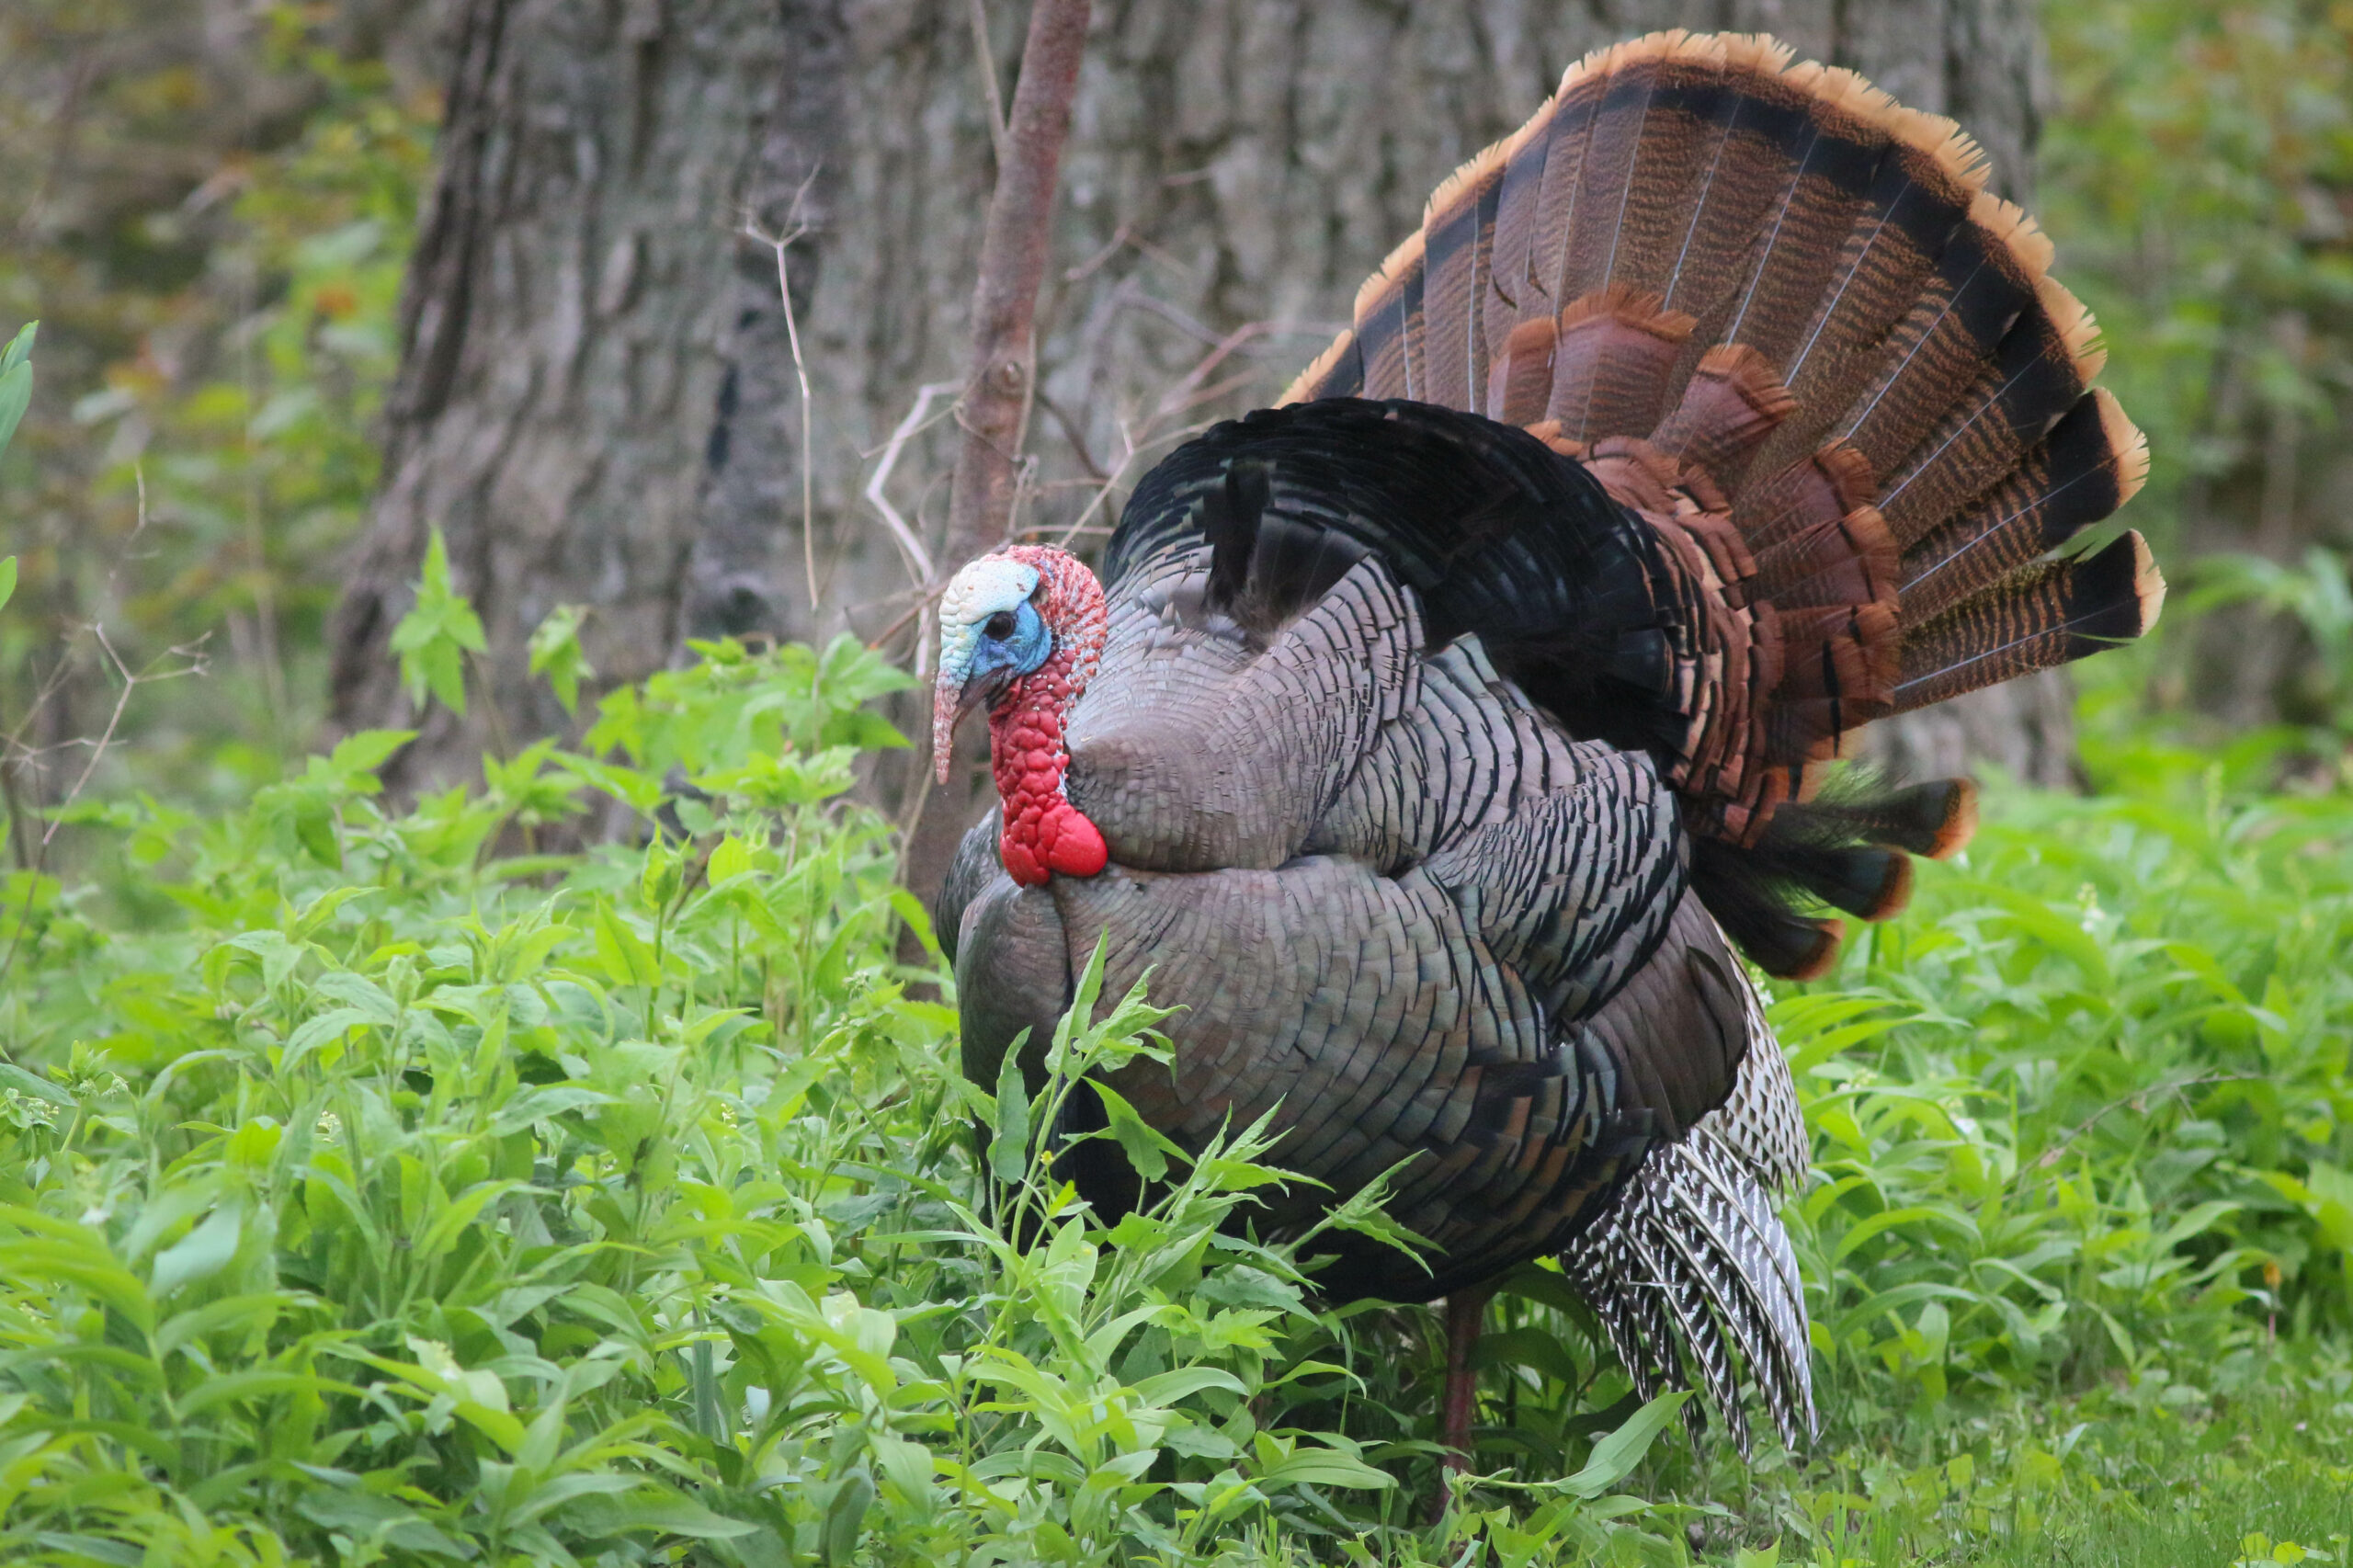 A male wild turkey with its tail feathers fanned walks through foliage.